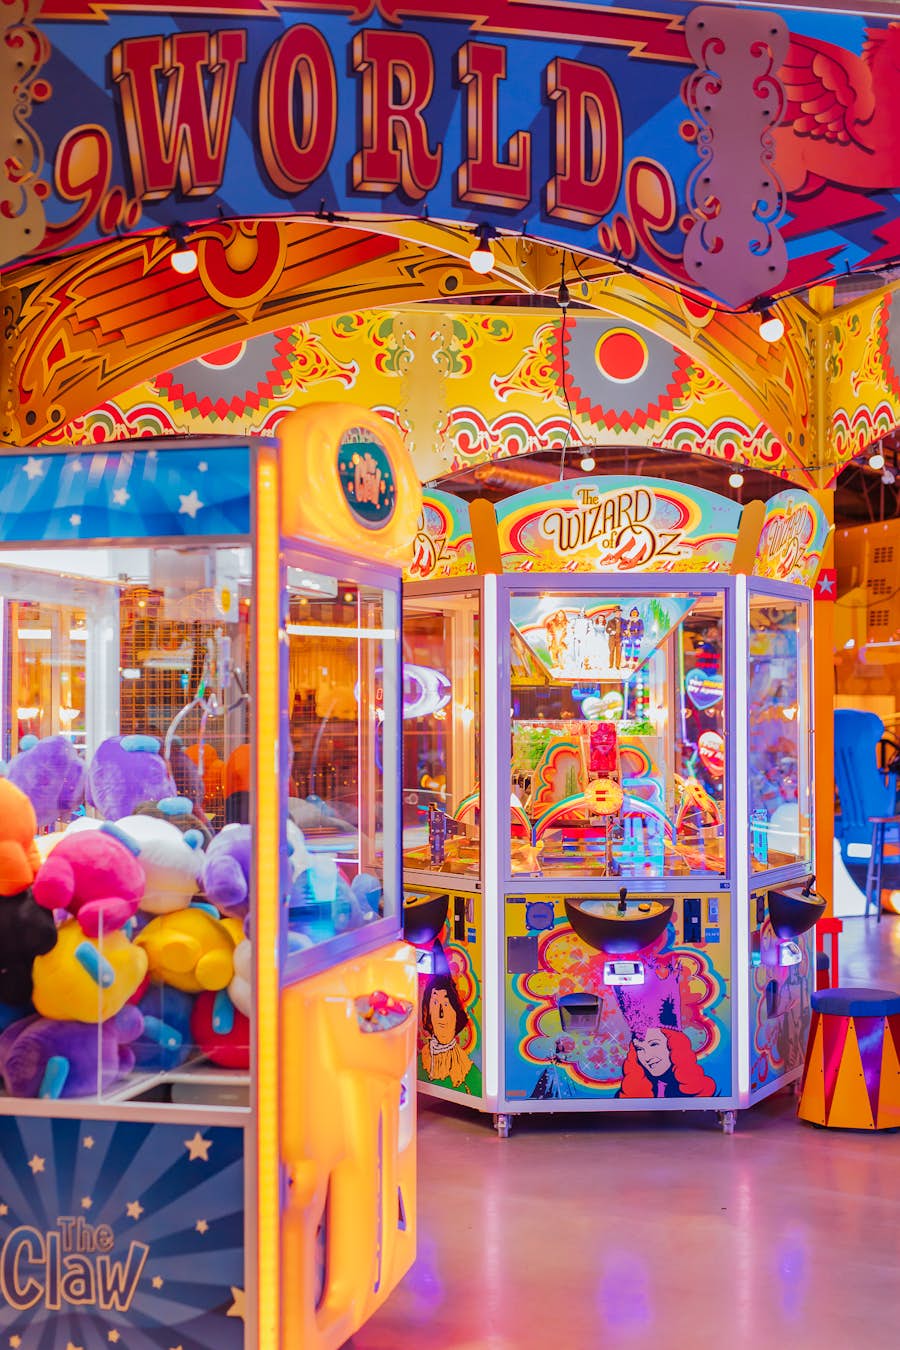 Claw machines in arcade area